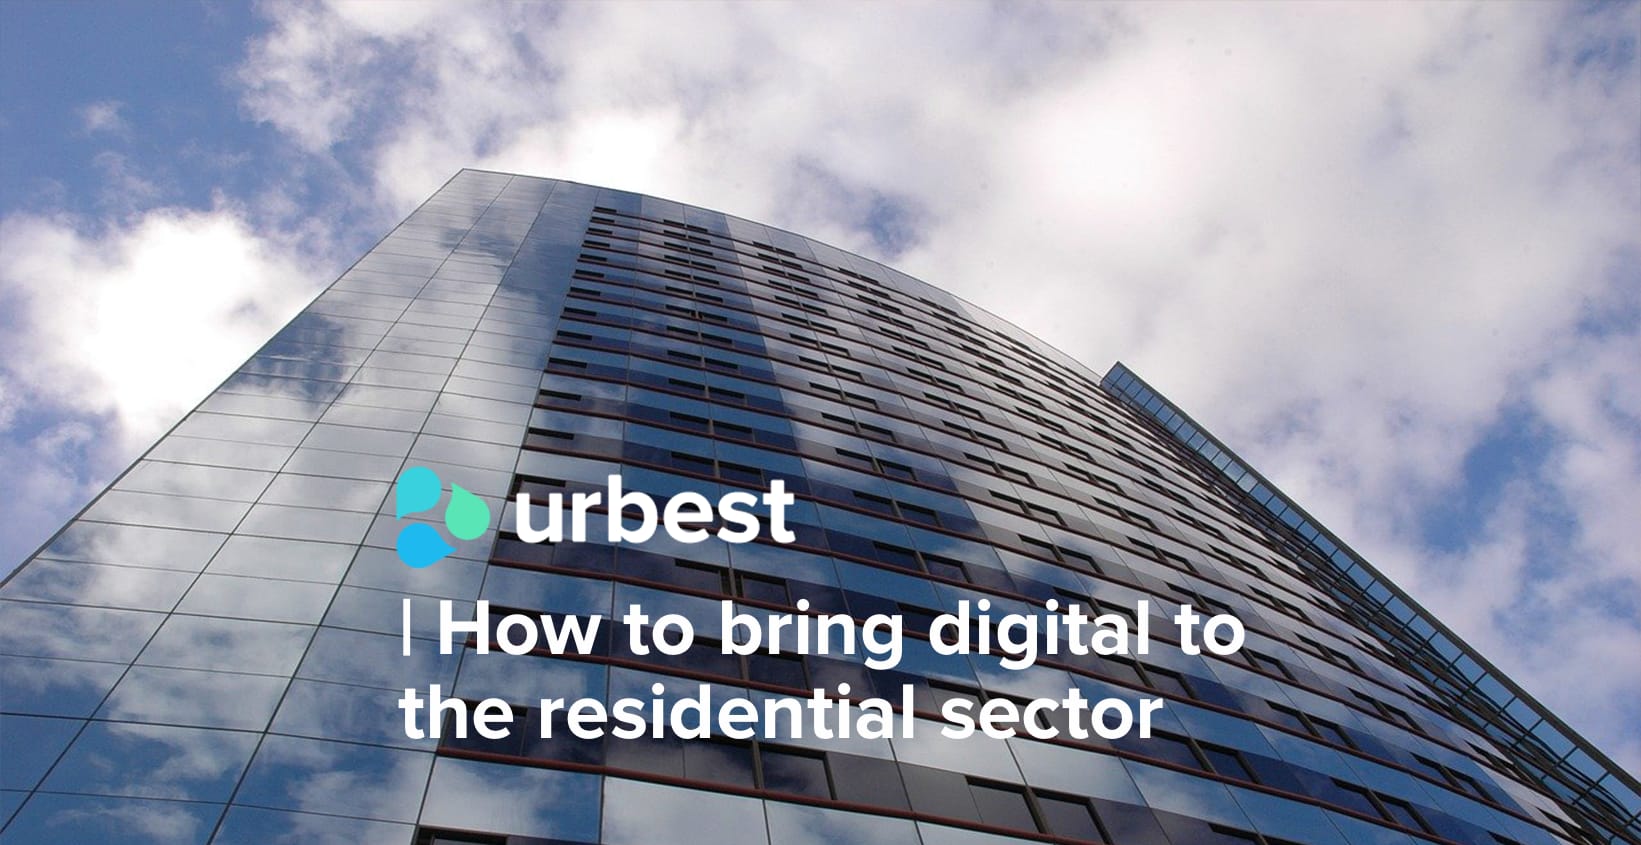 How to bring digital services to the residential sector